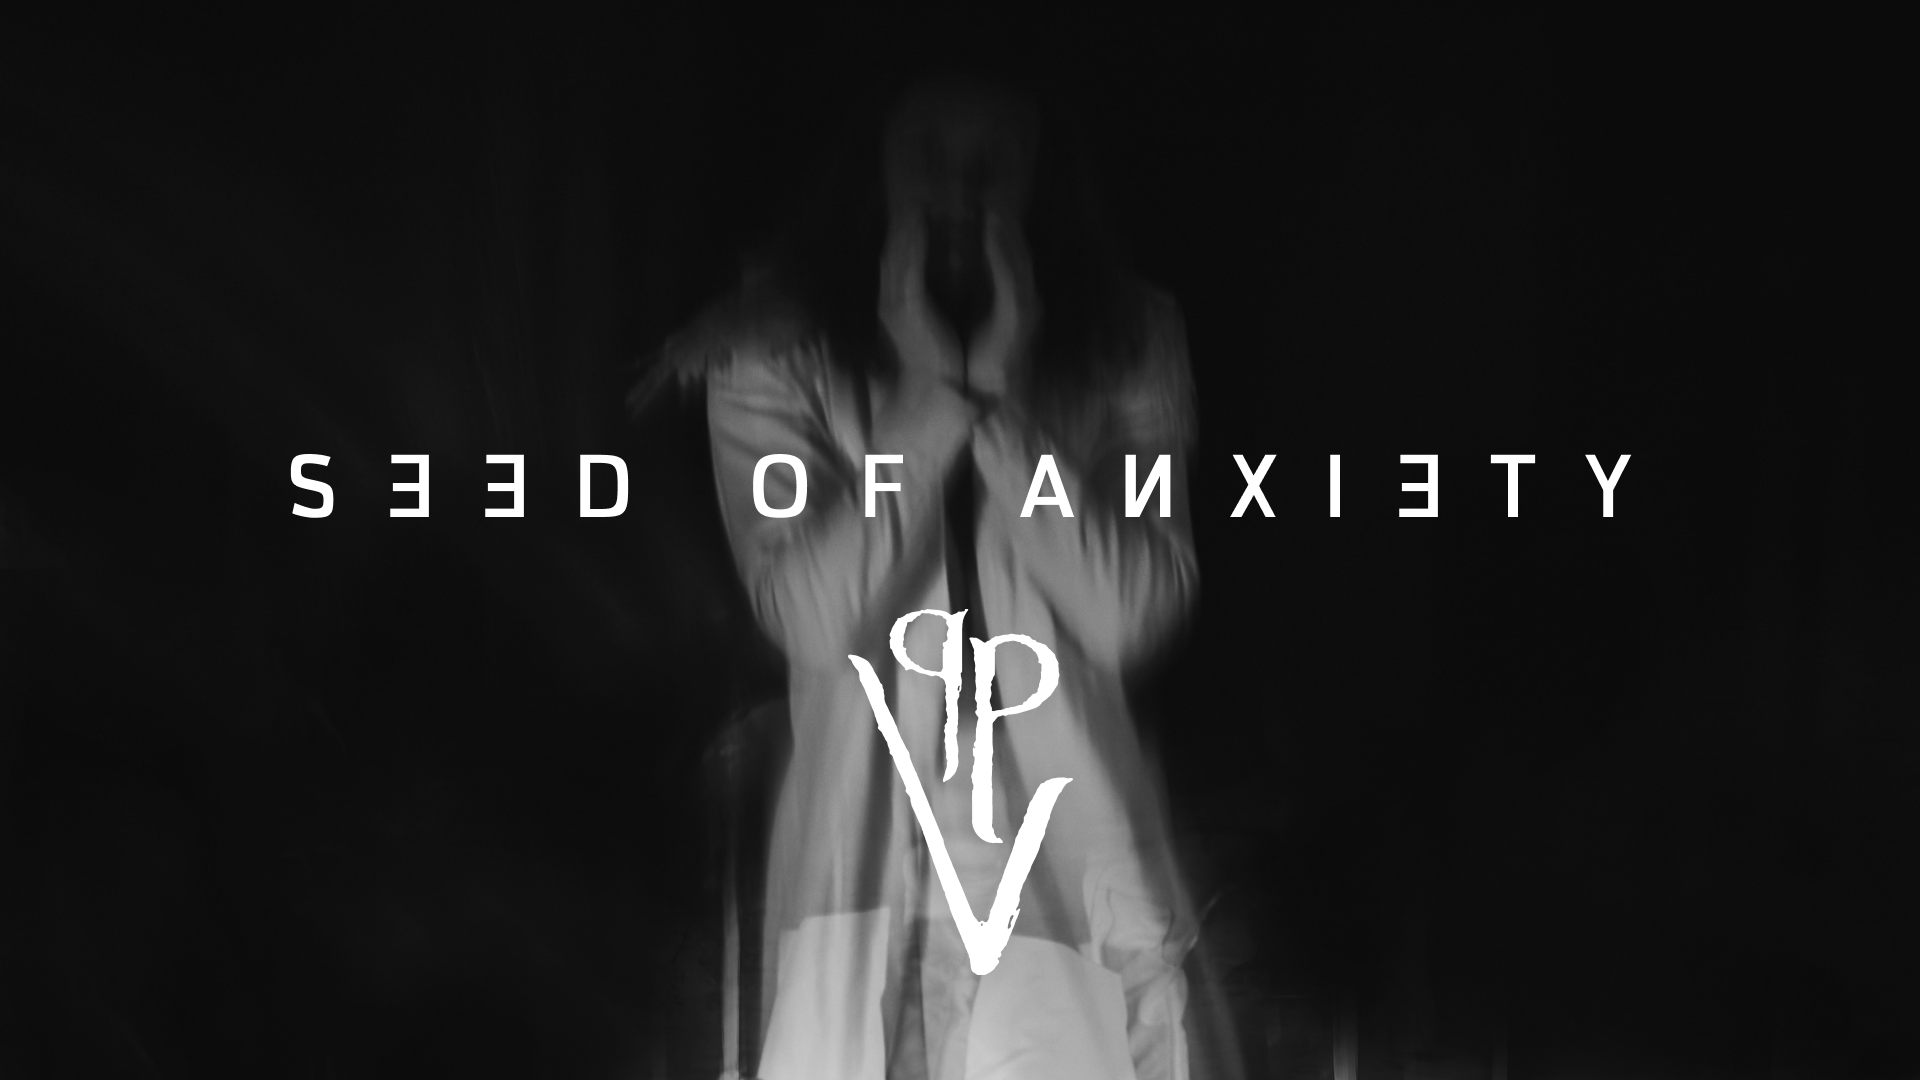 Psycho Visions - “Seed of anxiety” is out now